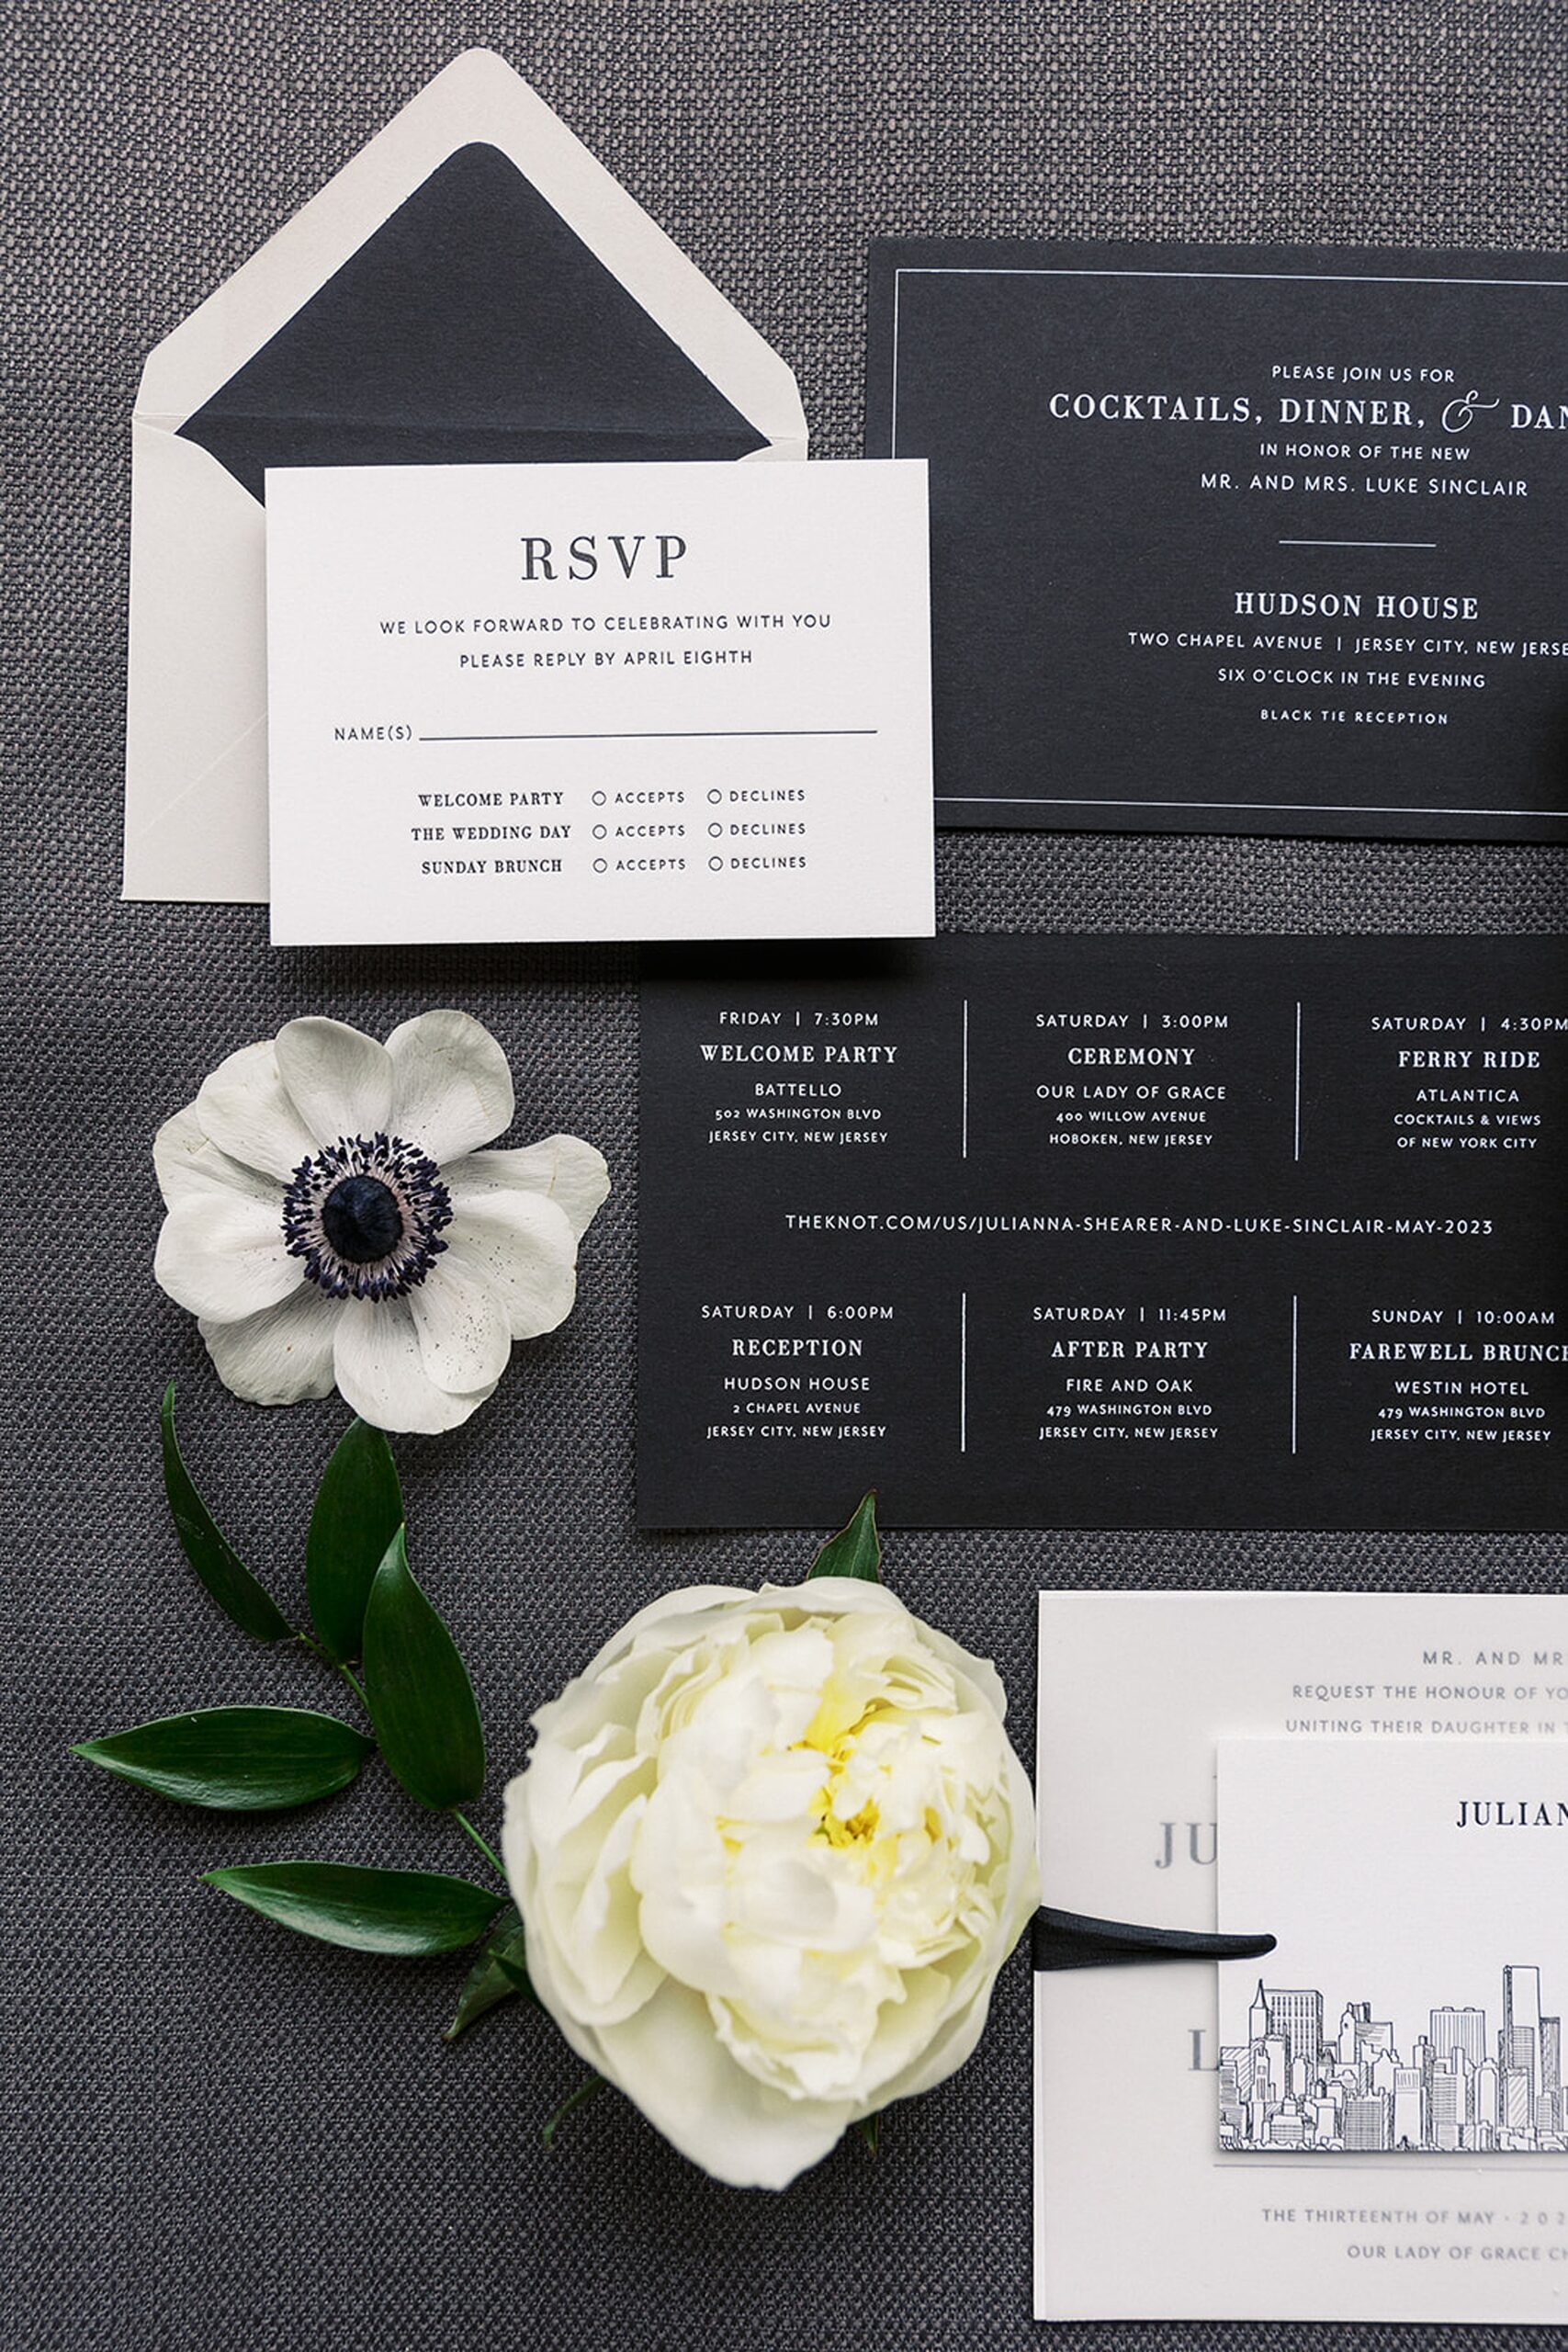 Details of invitations for a Hudson House wedding